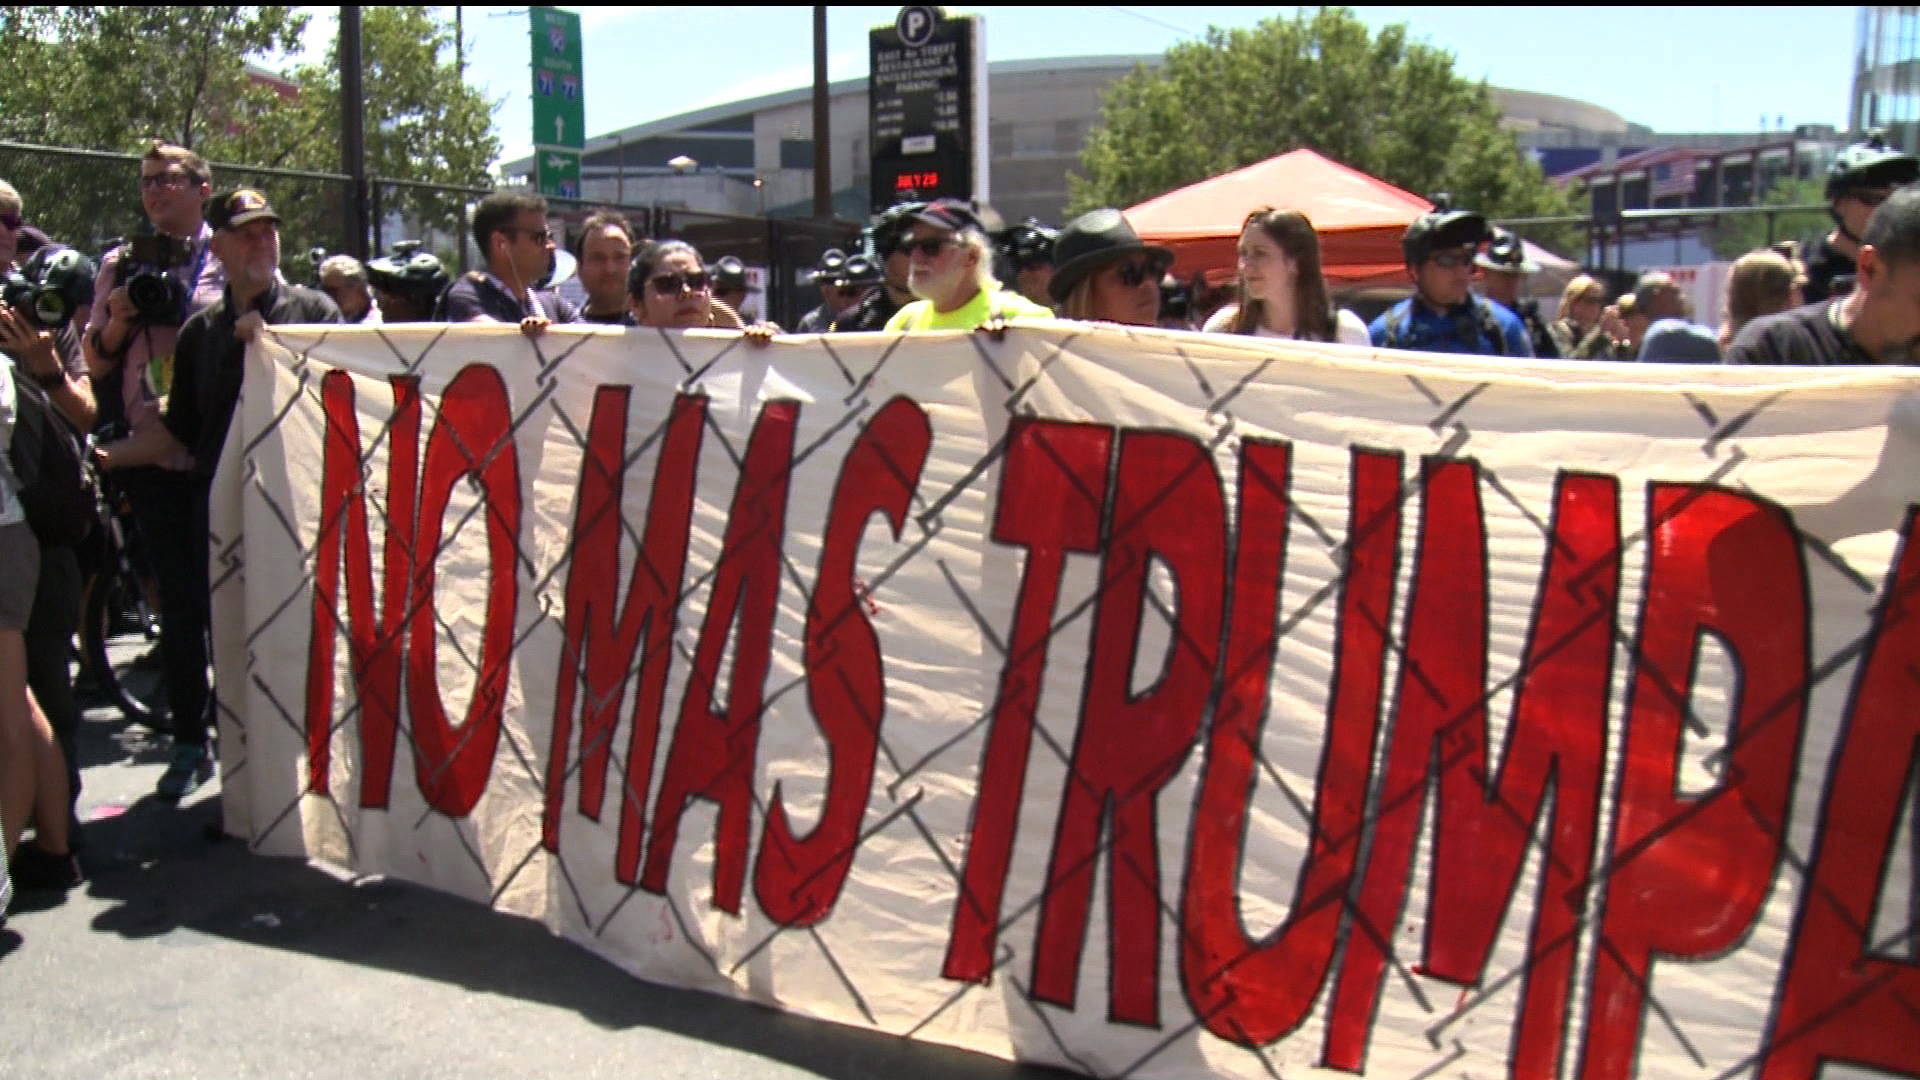 Activists Block RNC Entrance with Mock Border Wall So Trump’s Hate “Won’t Reach ...